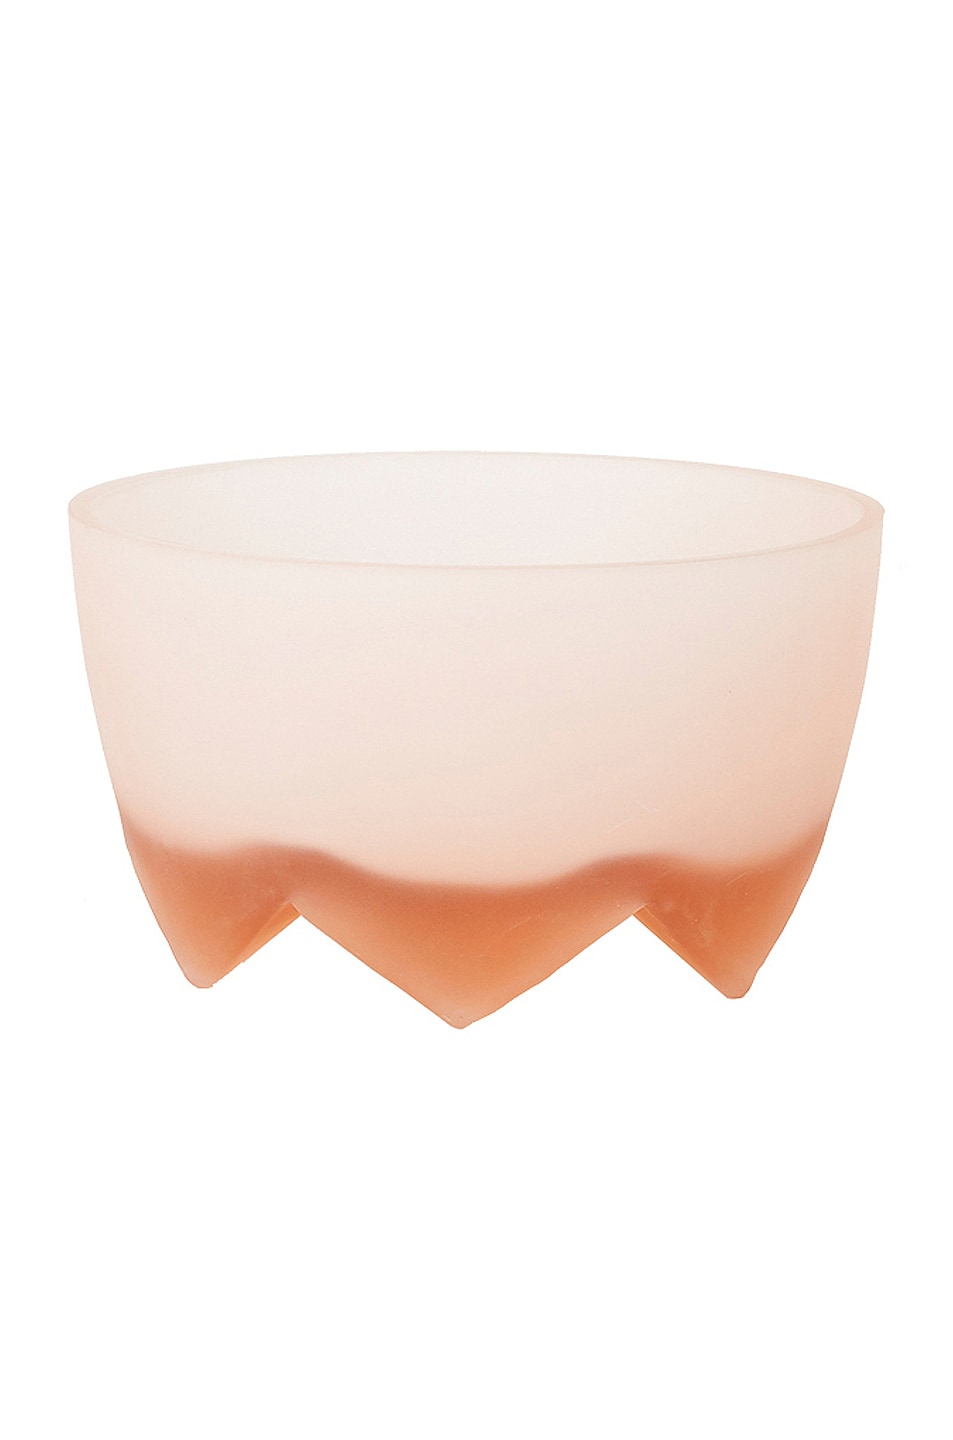 Image 1 of HAWKINS NEW YORK Alyson Large Cast Glass Footed Bowl in Frosted Blush